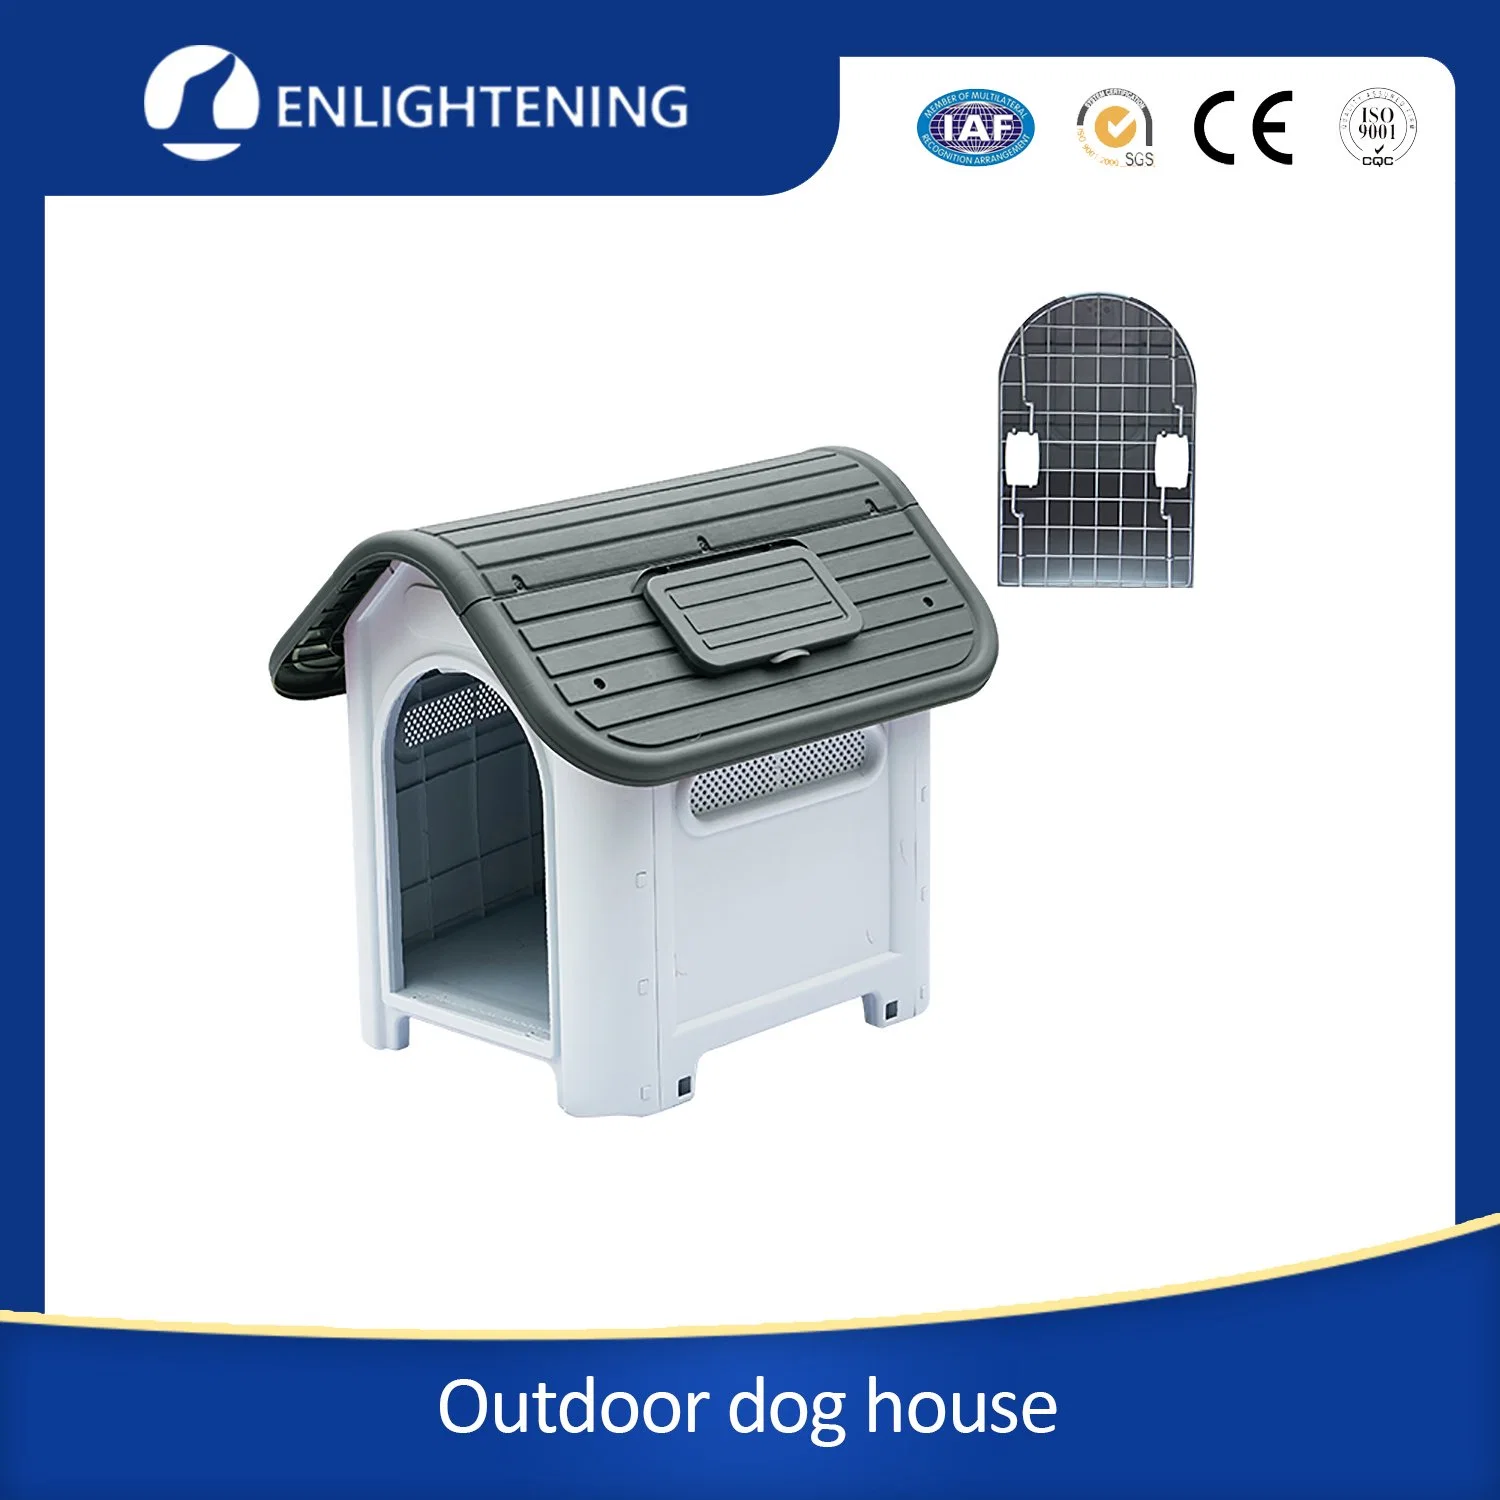 PP Material Large Nest Outdoor Plastic Kennel Big Dog Bed Cage Pet Room House Dog Cage Cat Nest Four Seasons Outdoor Dog Outdoor Cage